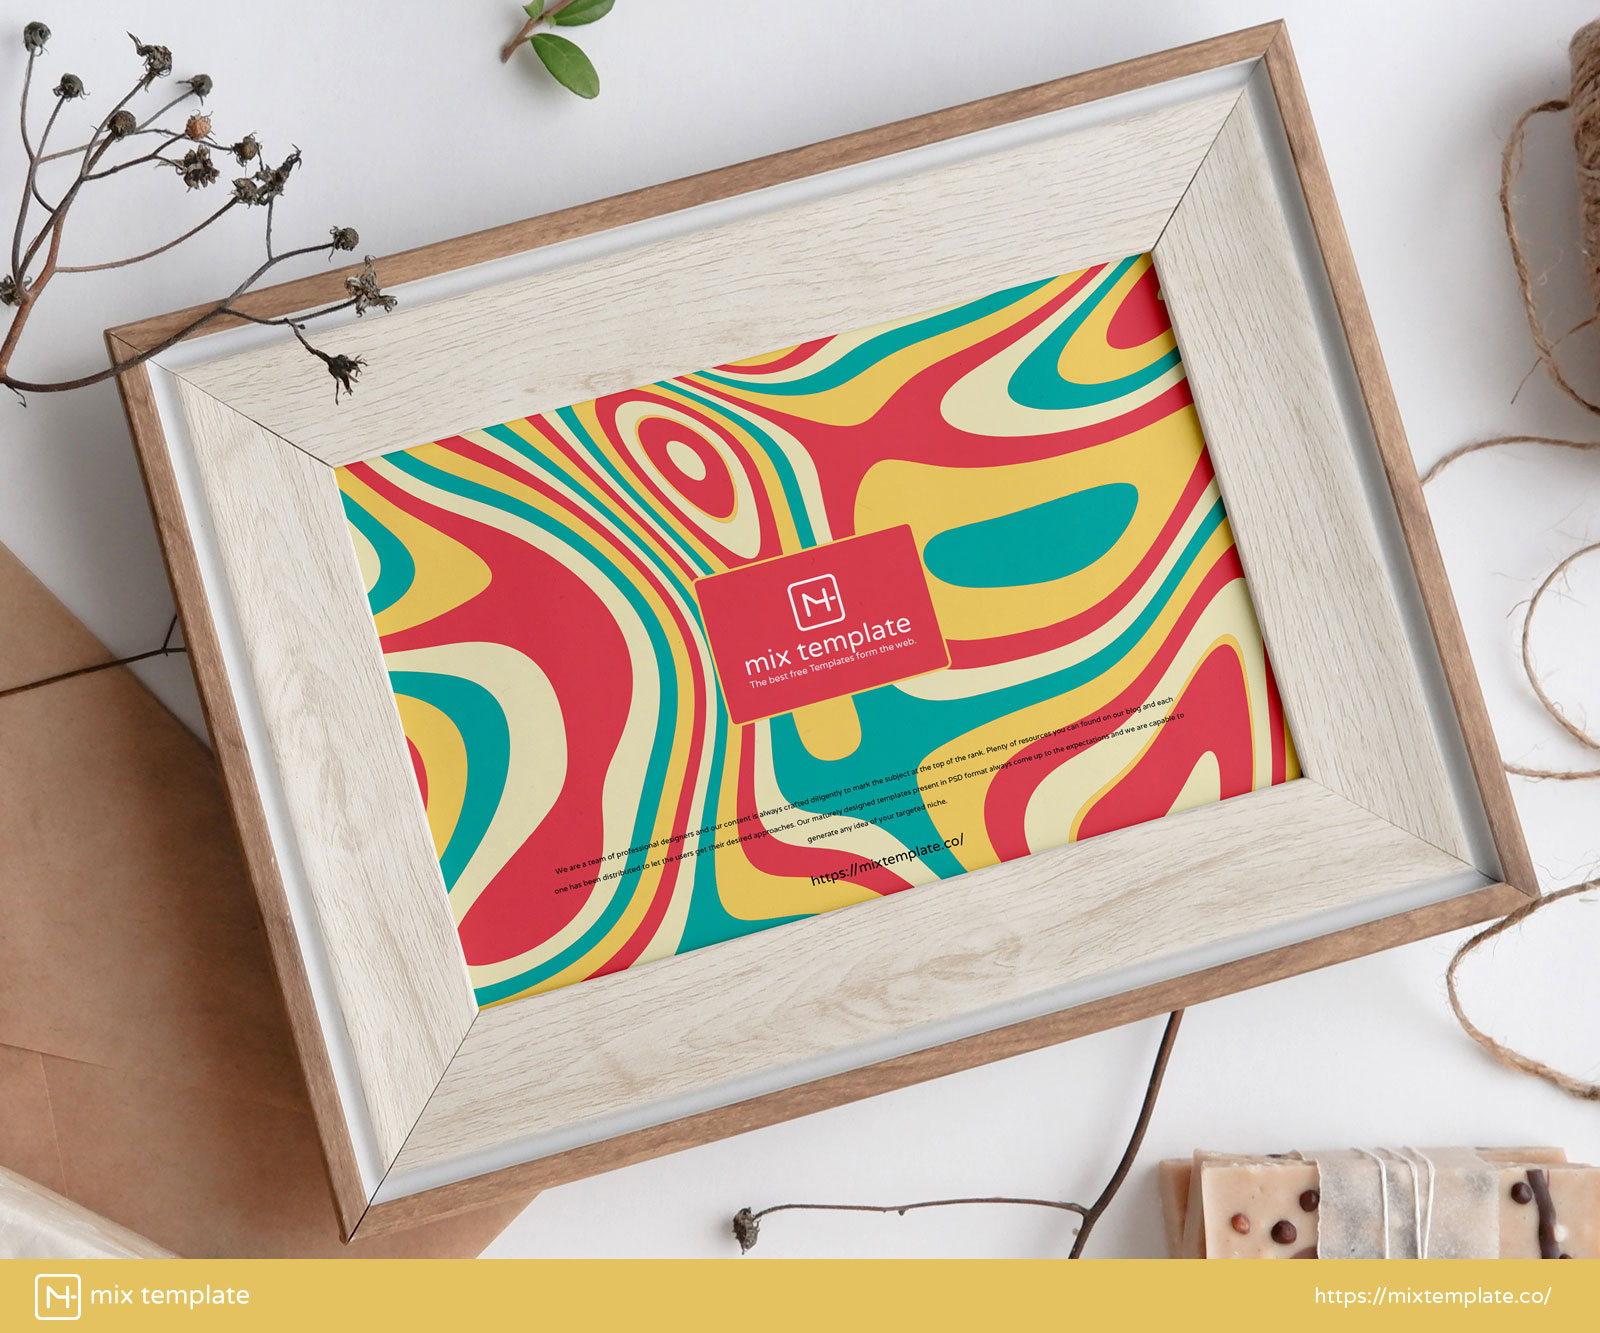 Free-Artistic-Wooden-Frame-Mockup-Template-38